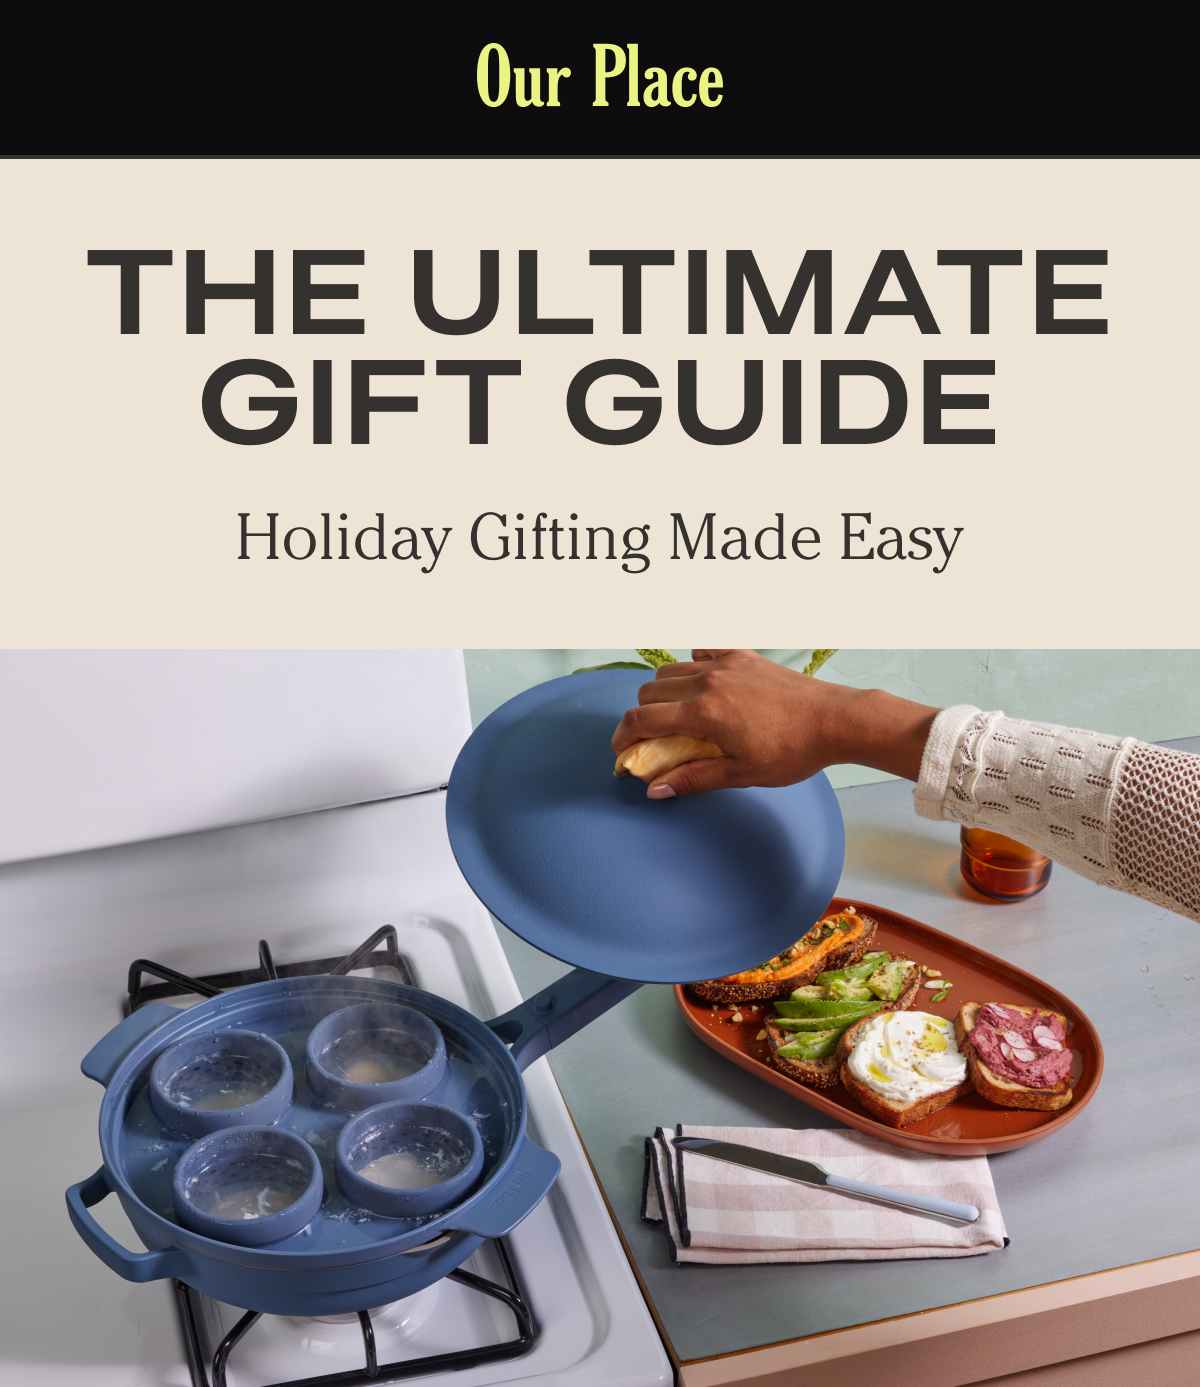 Our Place | The Ultimate Gift Guide | Holiday Gifting Made Easy